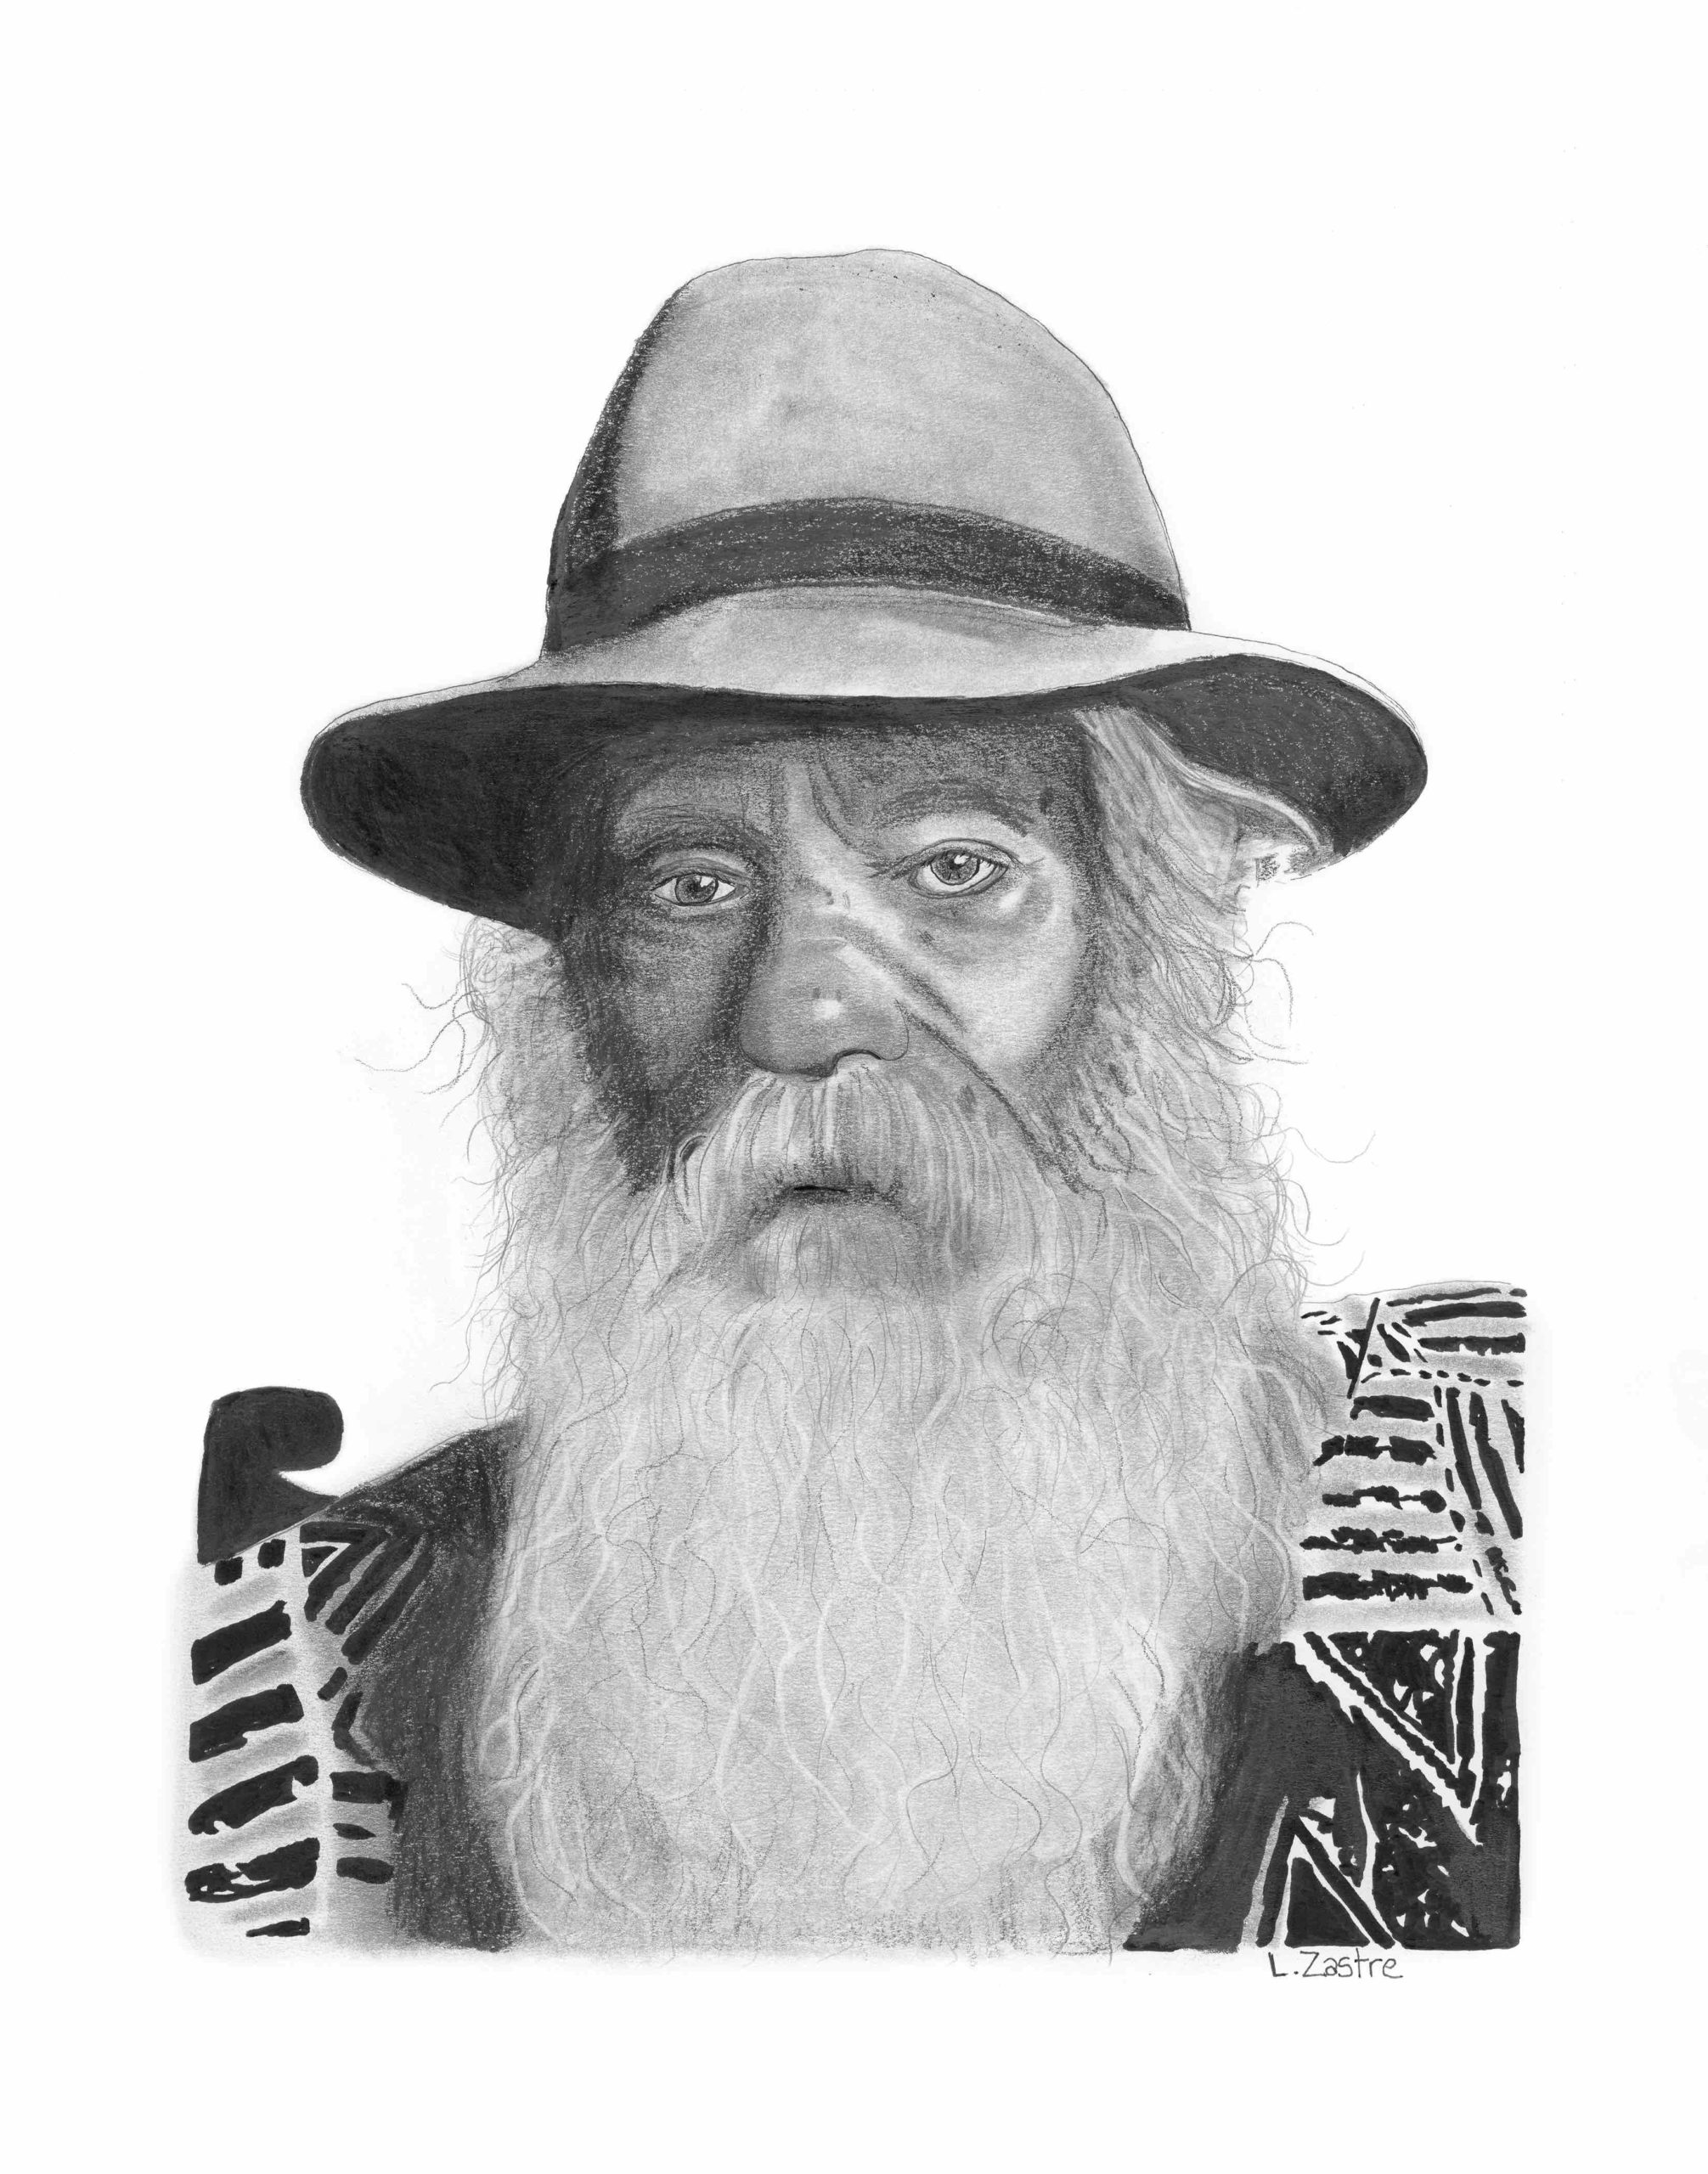 This is a portrait of an elderly man with a bushy white beard. He wears a floppy hat and graphic print shirt and stares forward with a dejected expression. He is a wheelchair user.